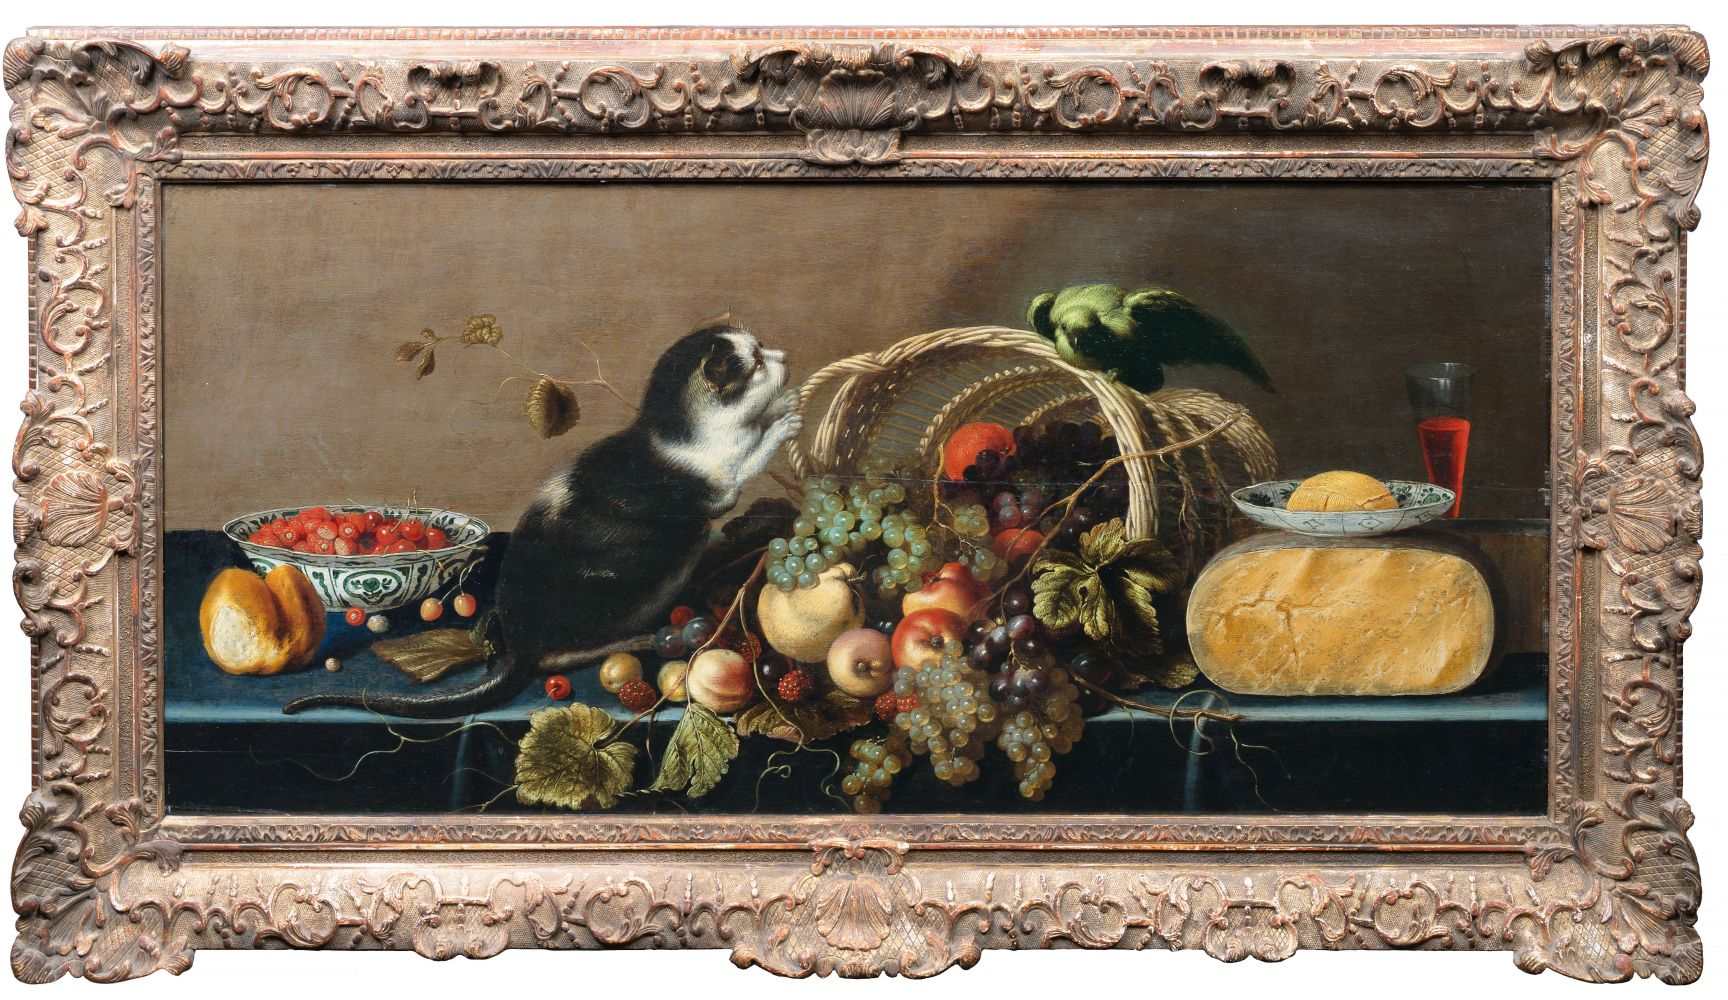 Still Life with Kitten, Parrot and Cheese - image 2